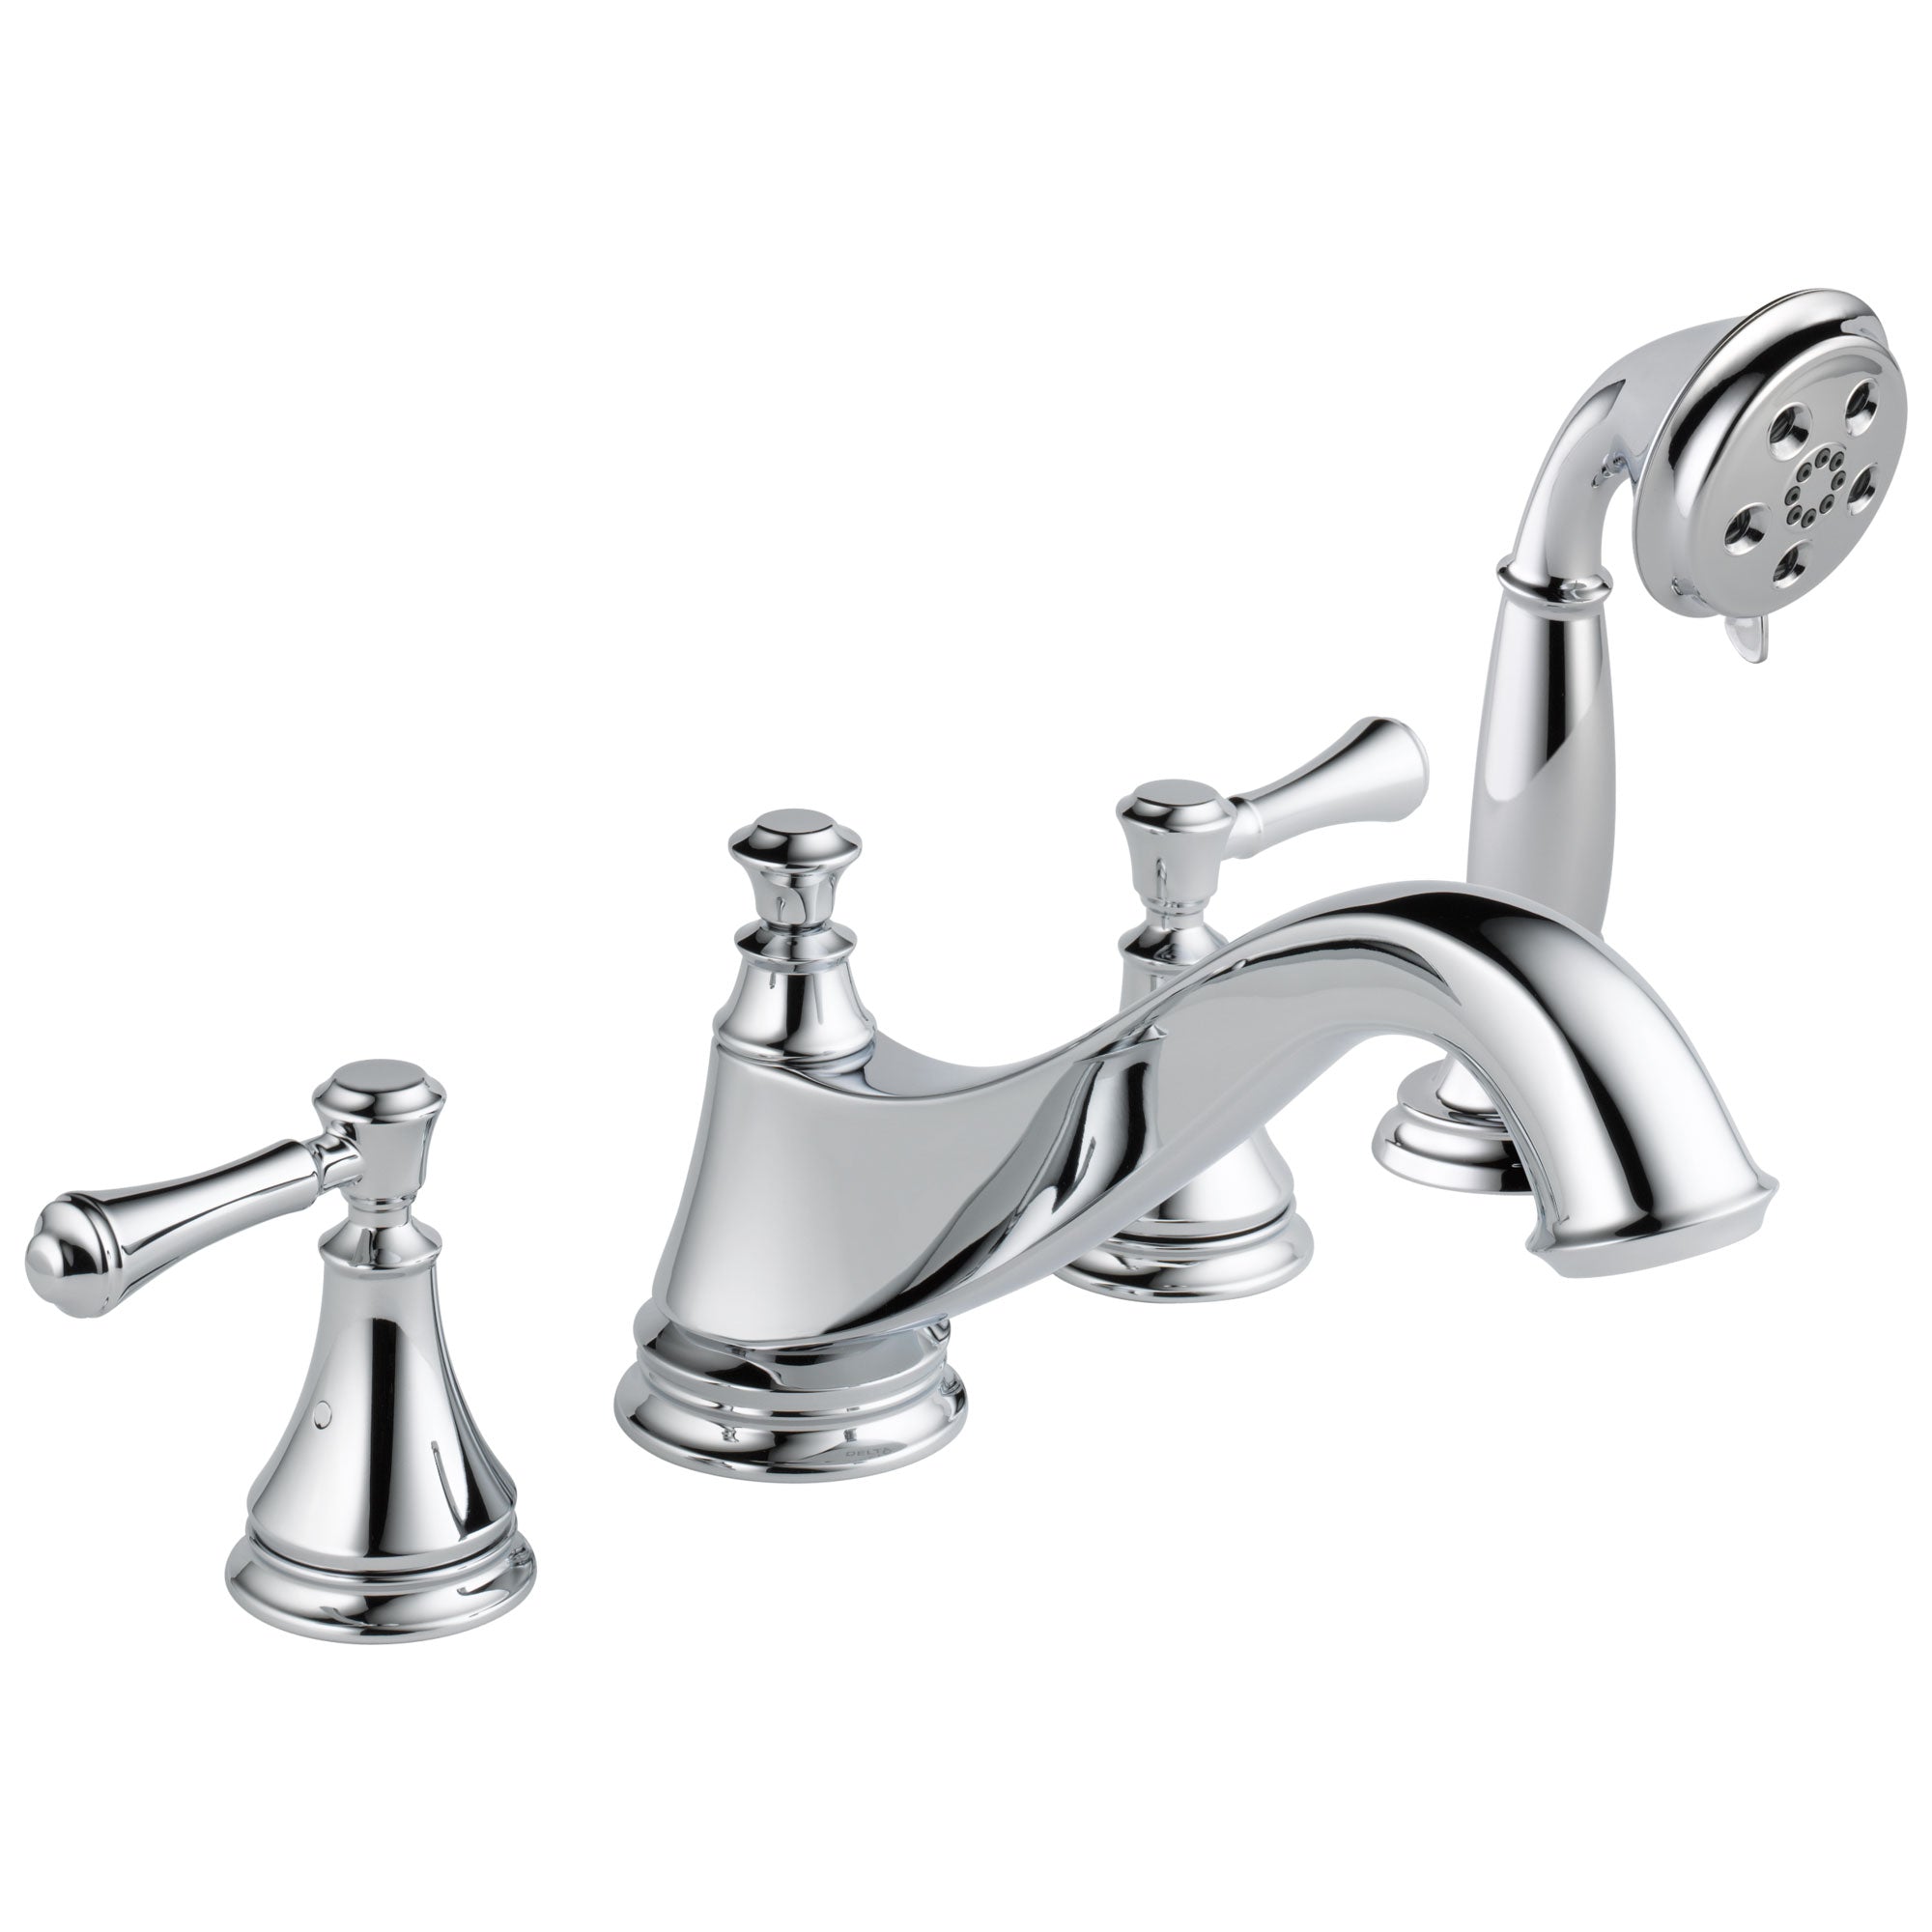 Delta Cassidy Collection Chrome Classic Spout Roman Tub Filler Faucet Trim Kit with Hand Shower INCLUDES (2) Lever Handles and Rough-in Valve D1416V